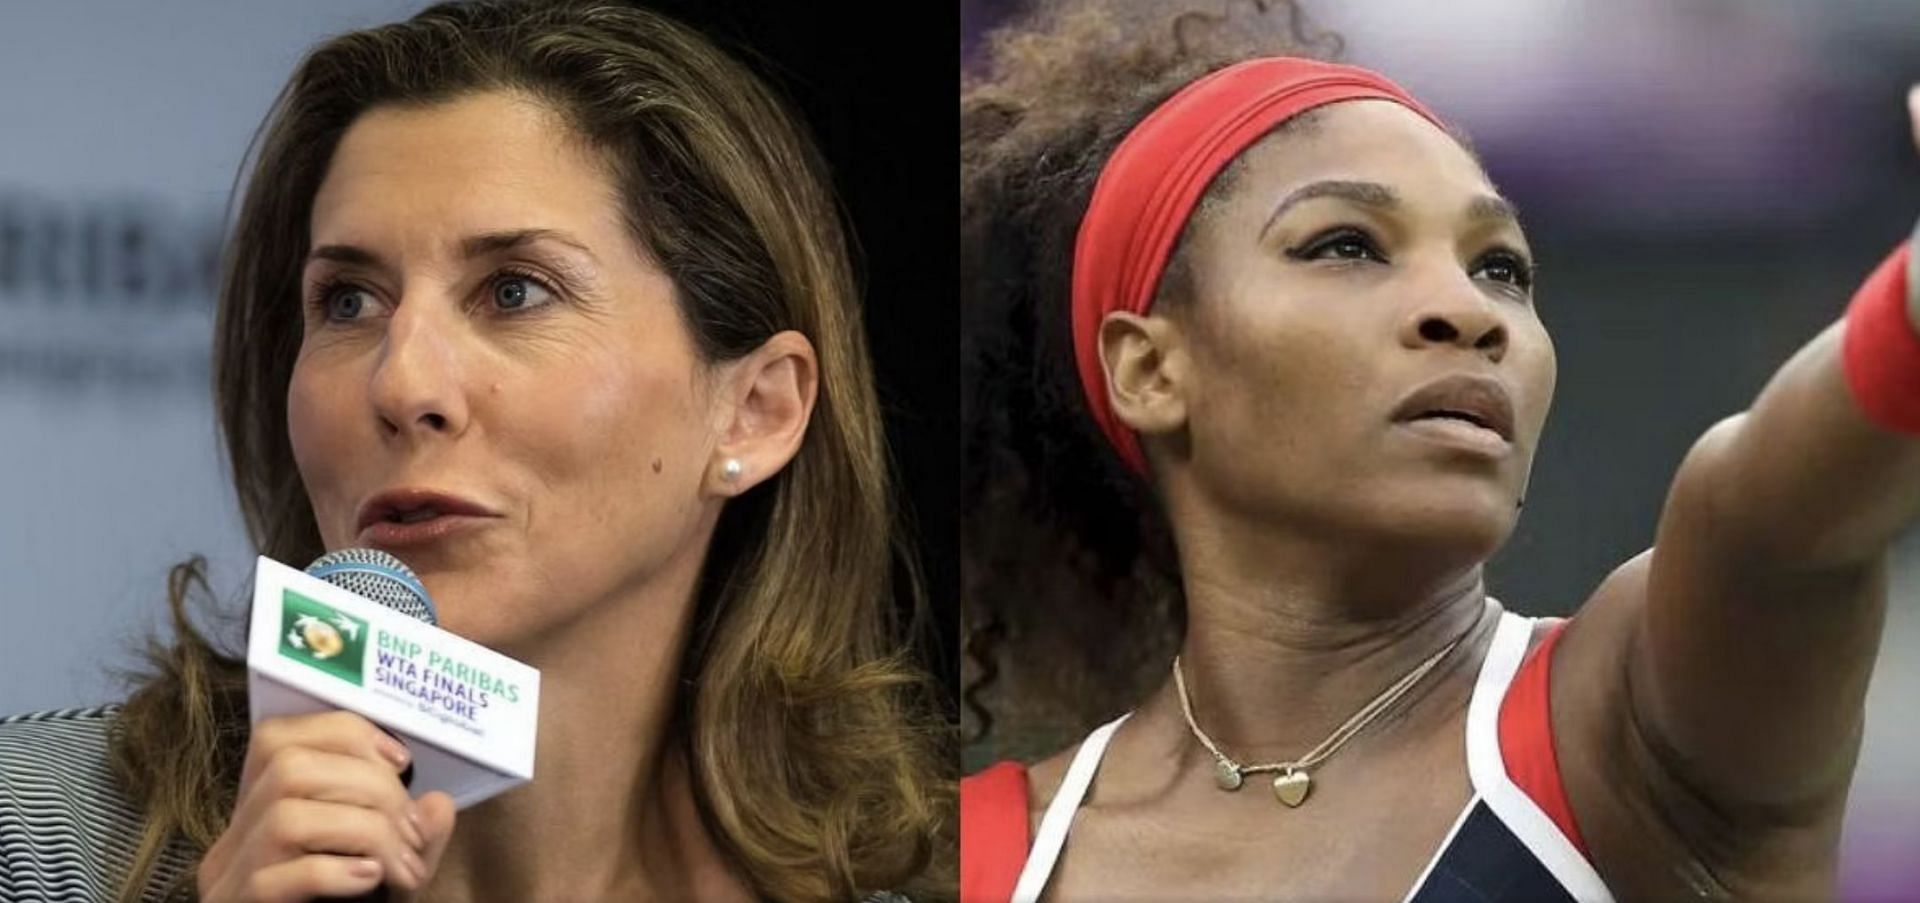 Monica Seles only managed to win once against Serena Williams